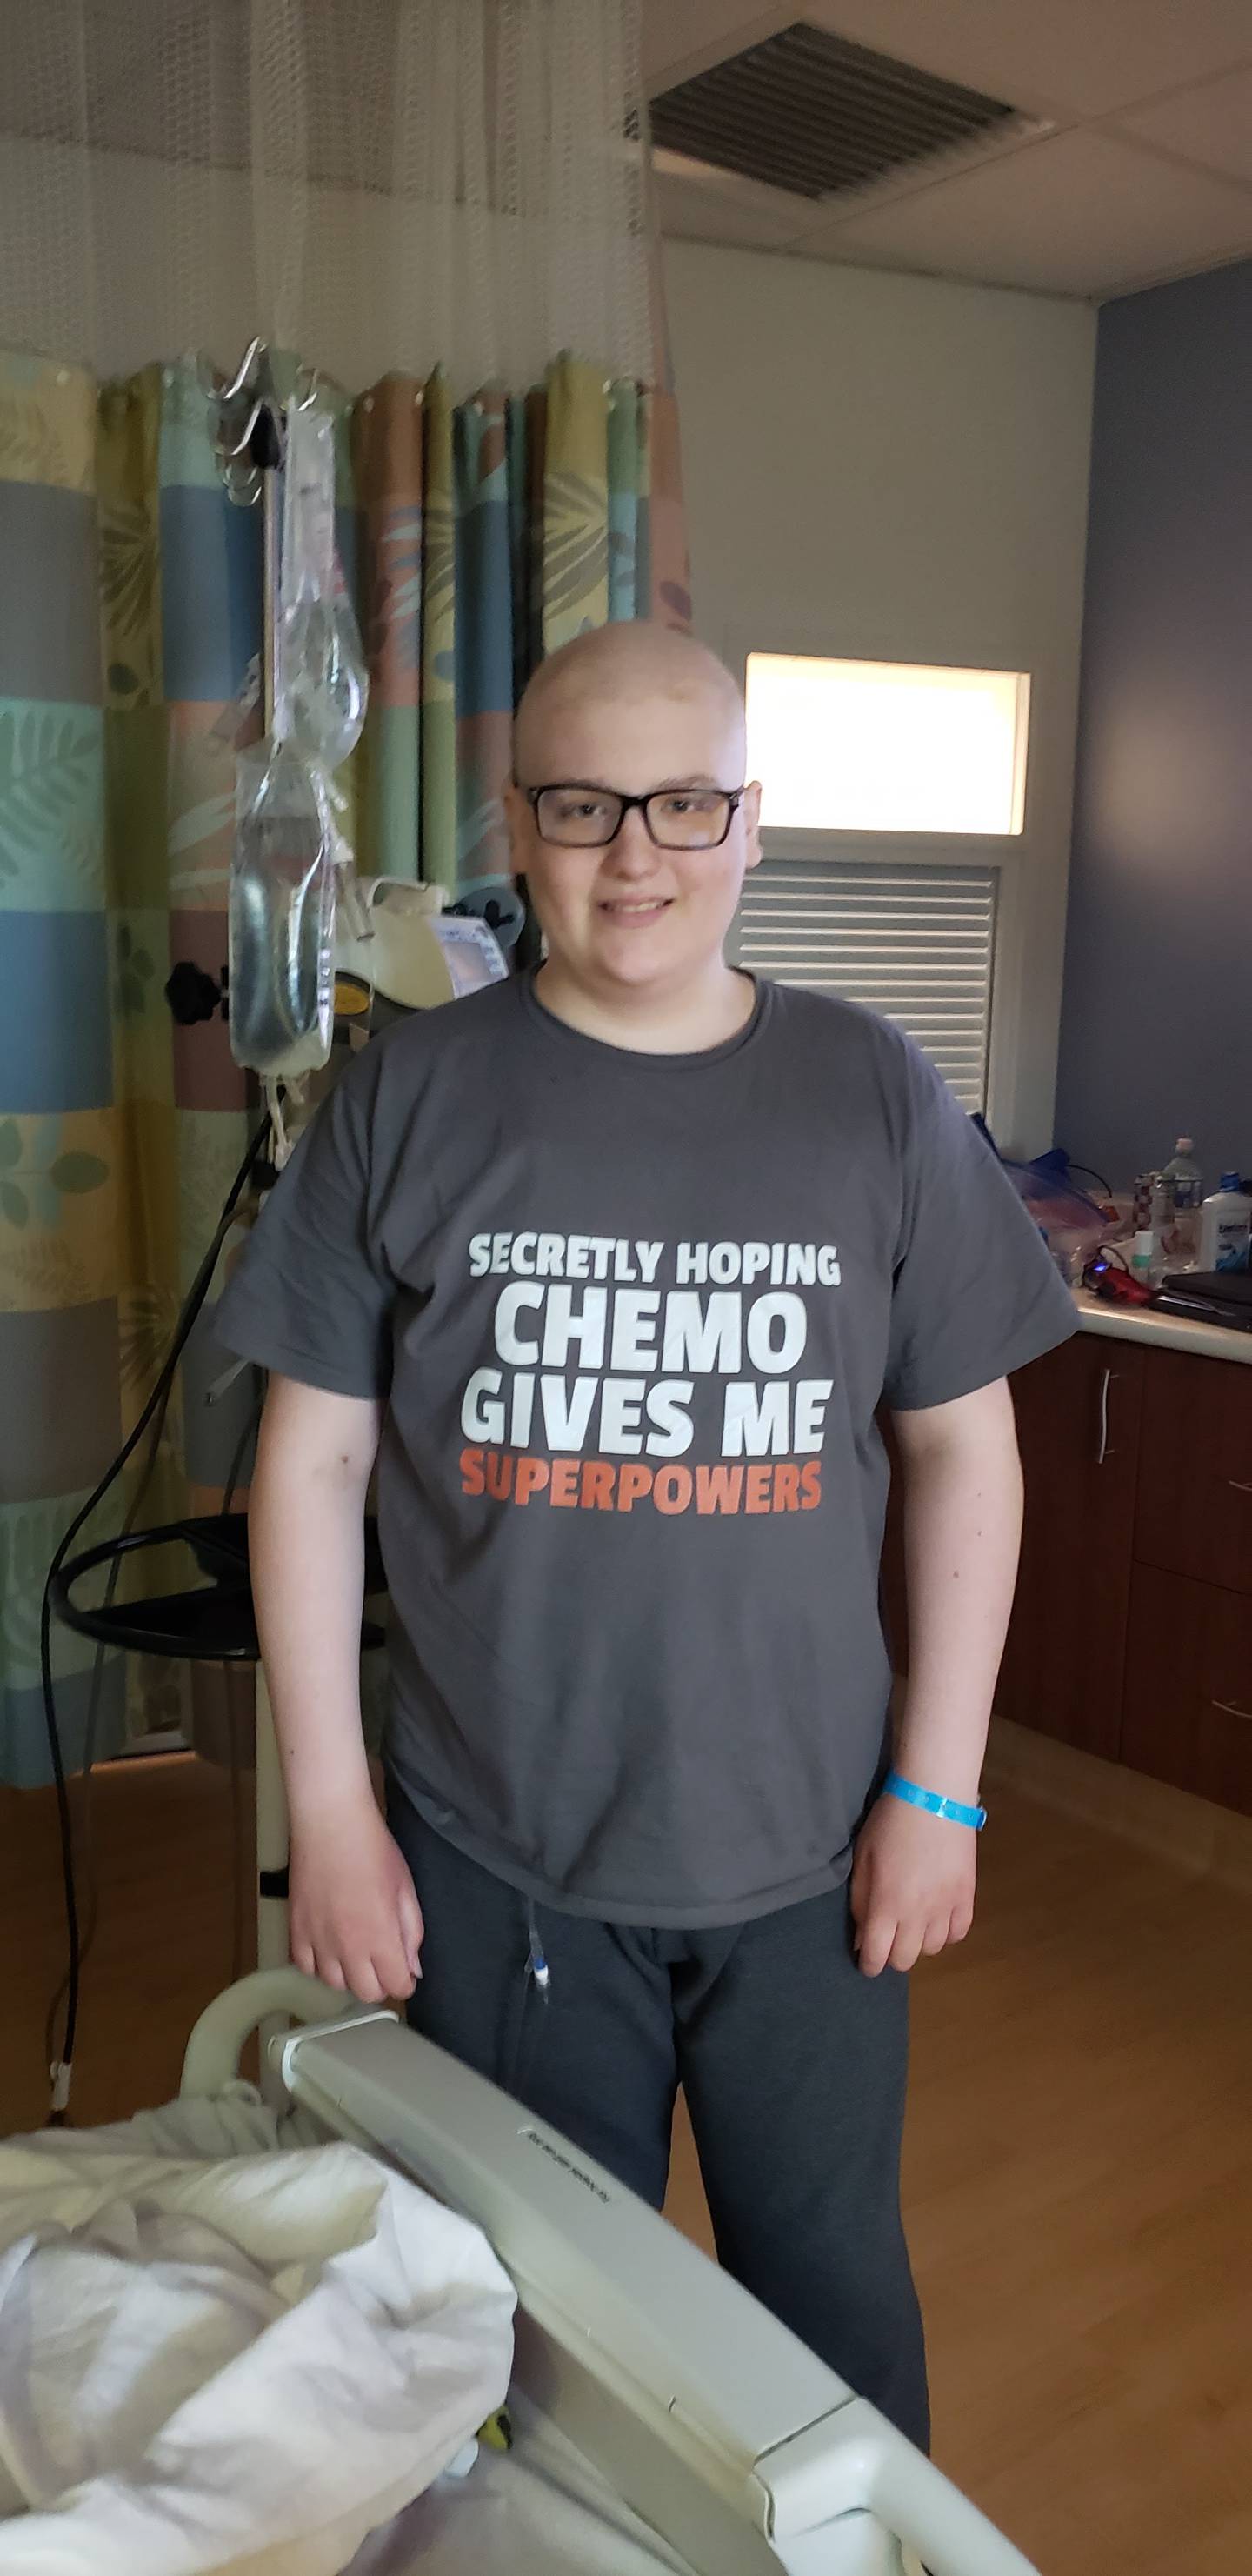 Vinnie Gincauskas, 15, of Lockport, has a rare soft tissue cancer called desmoplastic small round cell tumors or DSRCT. The cancer is aggressive but so is his treatment. “Benefit for Vinnie's Voyage” will be held 4 to 11 p.m. Friday, June 10, 2022, at the Lockport American Legion.